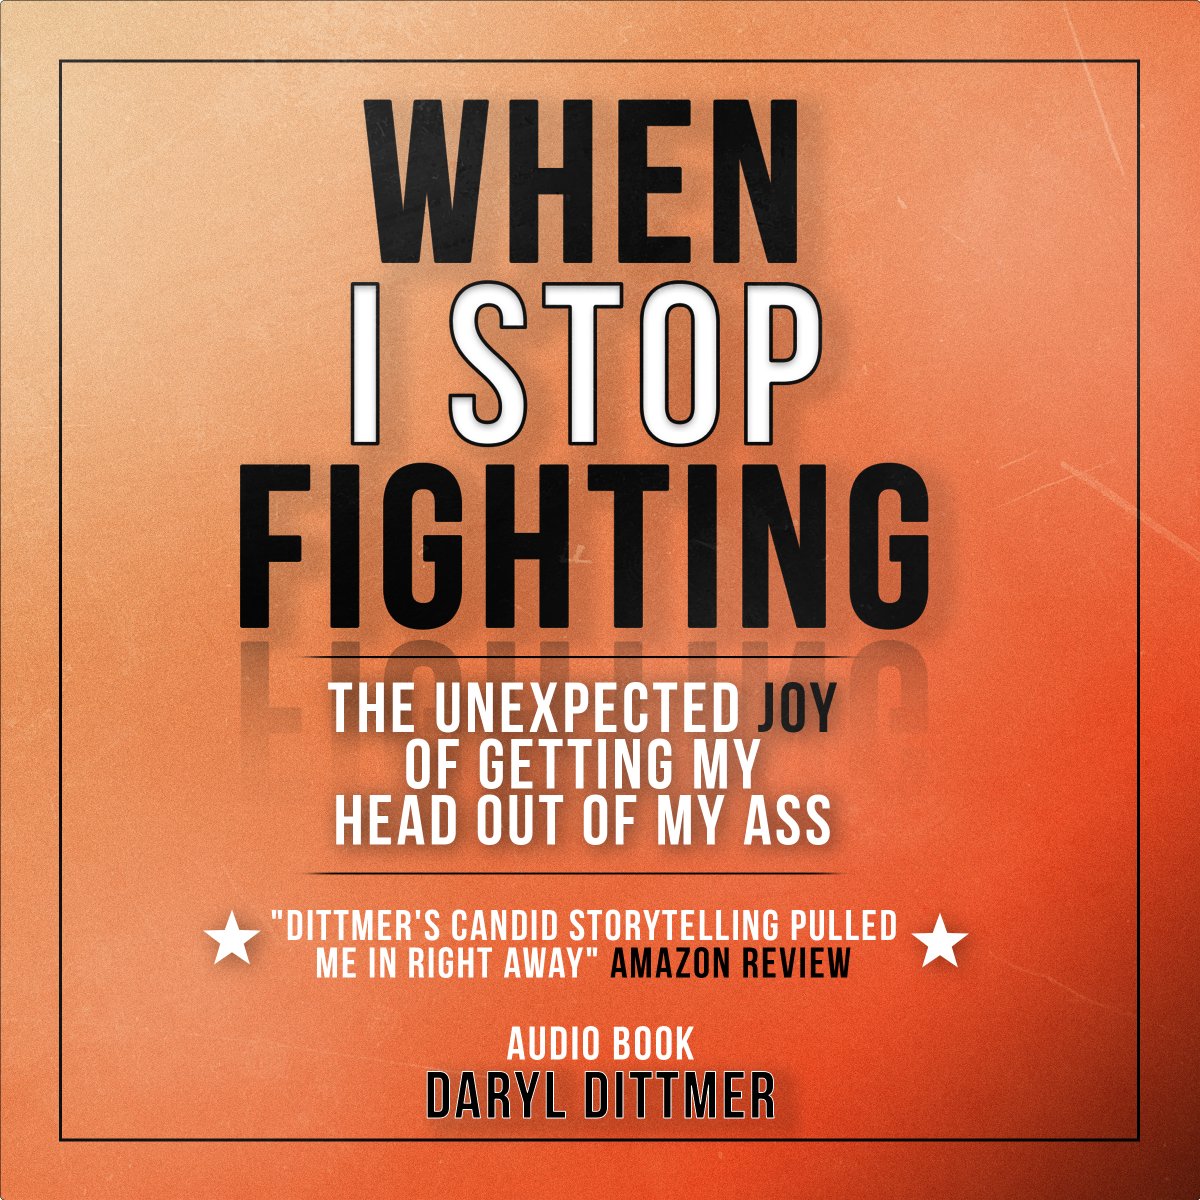 The audiobook version of 'When I Stop Fighting' is now available for download! Immerse yourself in the unexpected joys of personal growth wherever you go. 

#AudioBookRelease #PersonalGrowth #NowAvailable #NewRelease #DownloadNow #MotivationalListening #SelfGrowth #Immersion